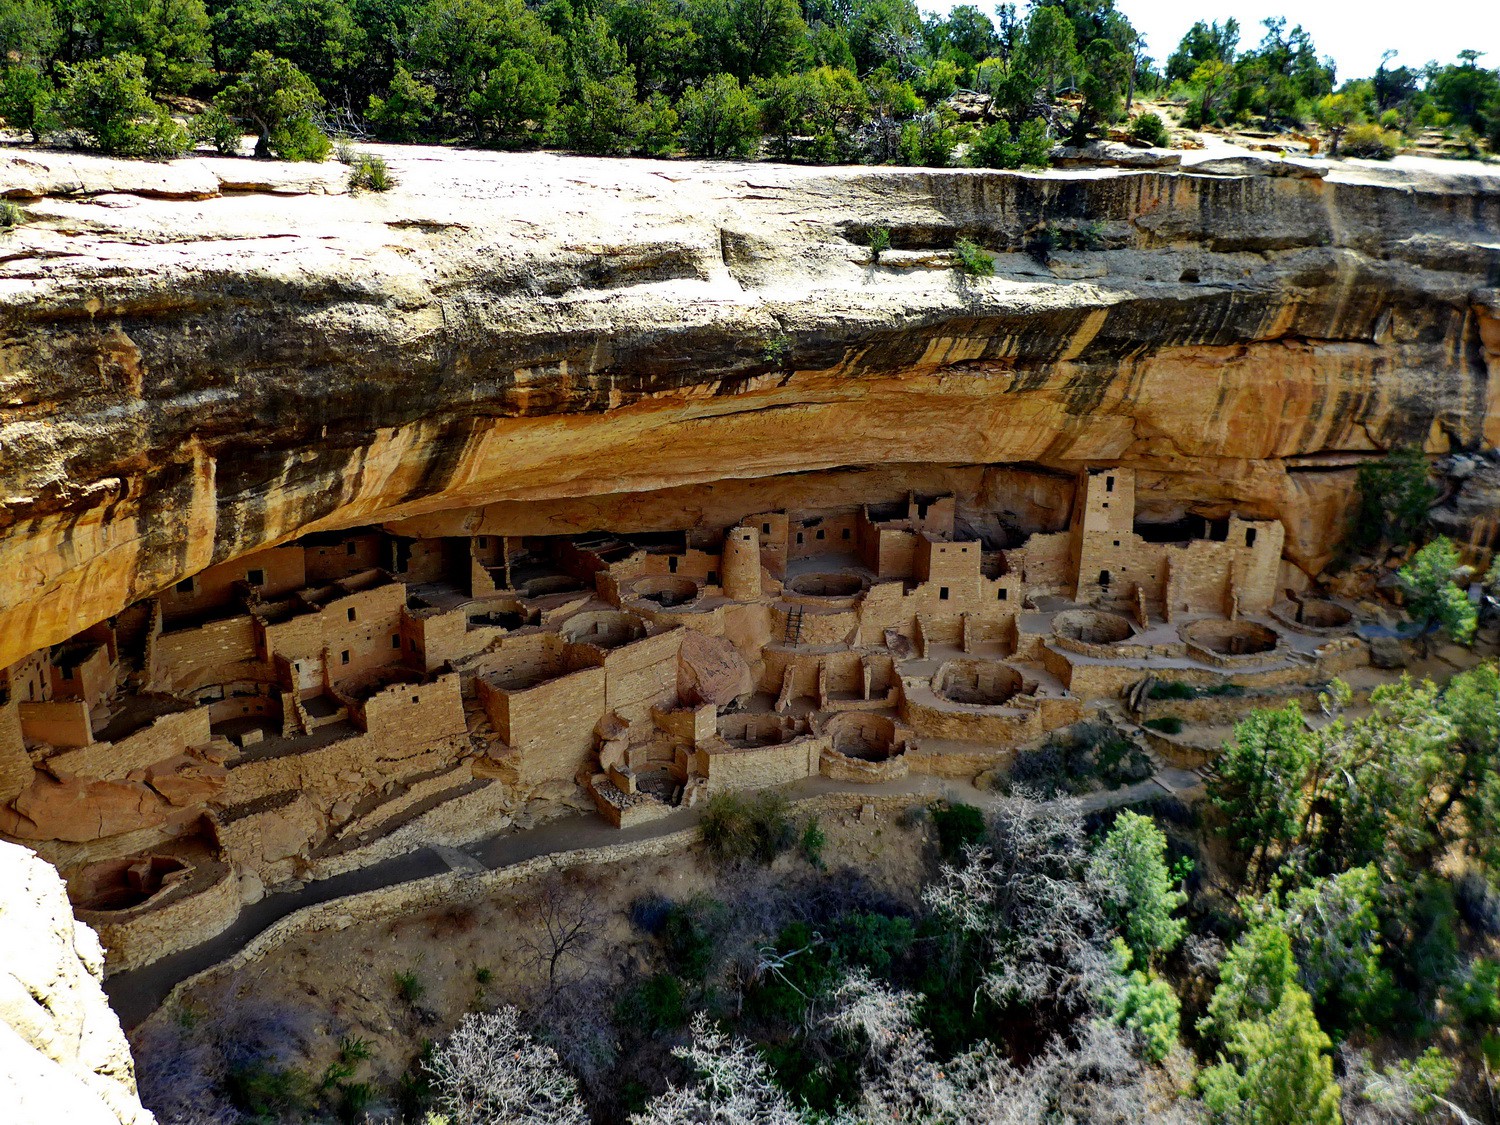 Cliff Palace built about 1200 AD by the Ancestral Pueblo people